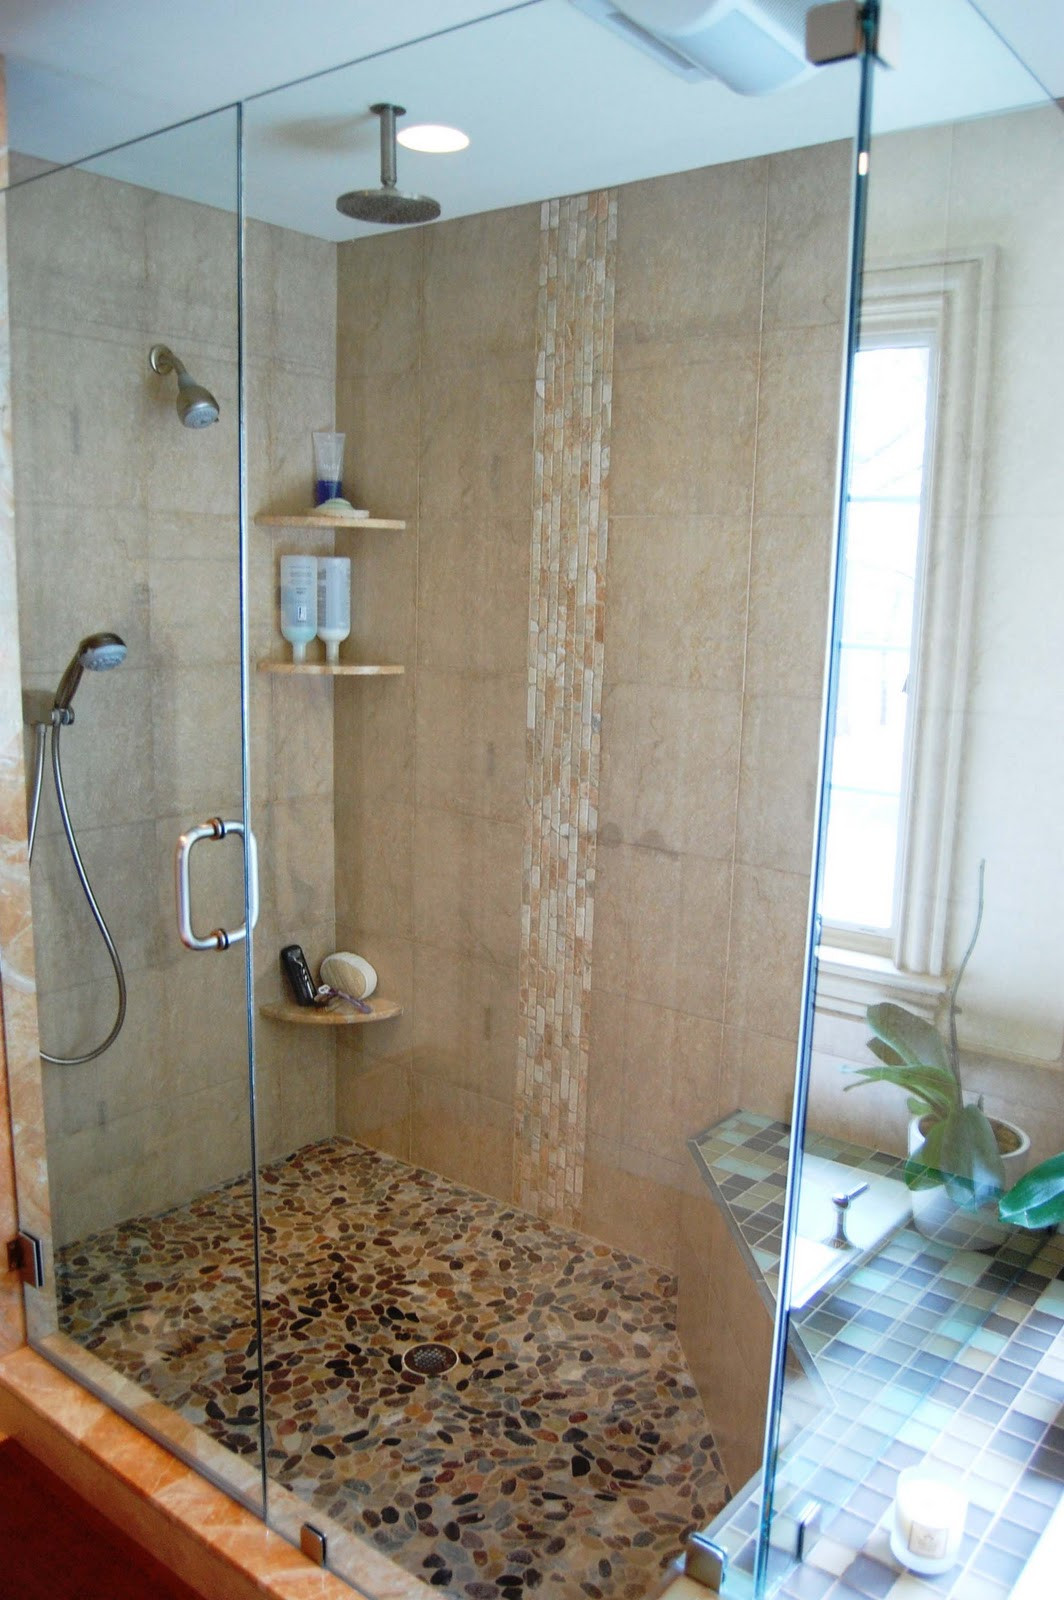 Shower Ideas For Small Bathroom
 Remodel Bathroom Shower Ideas and Tips Traba Homes